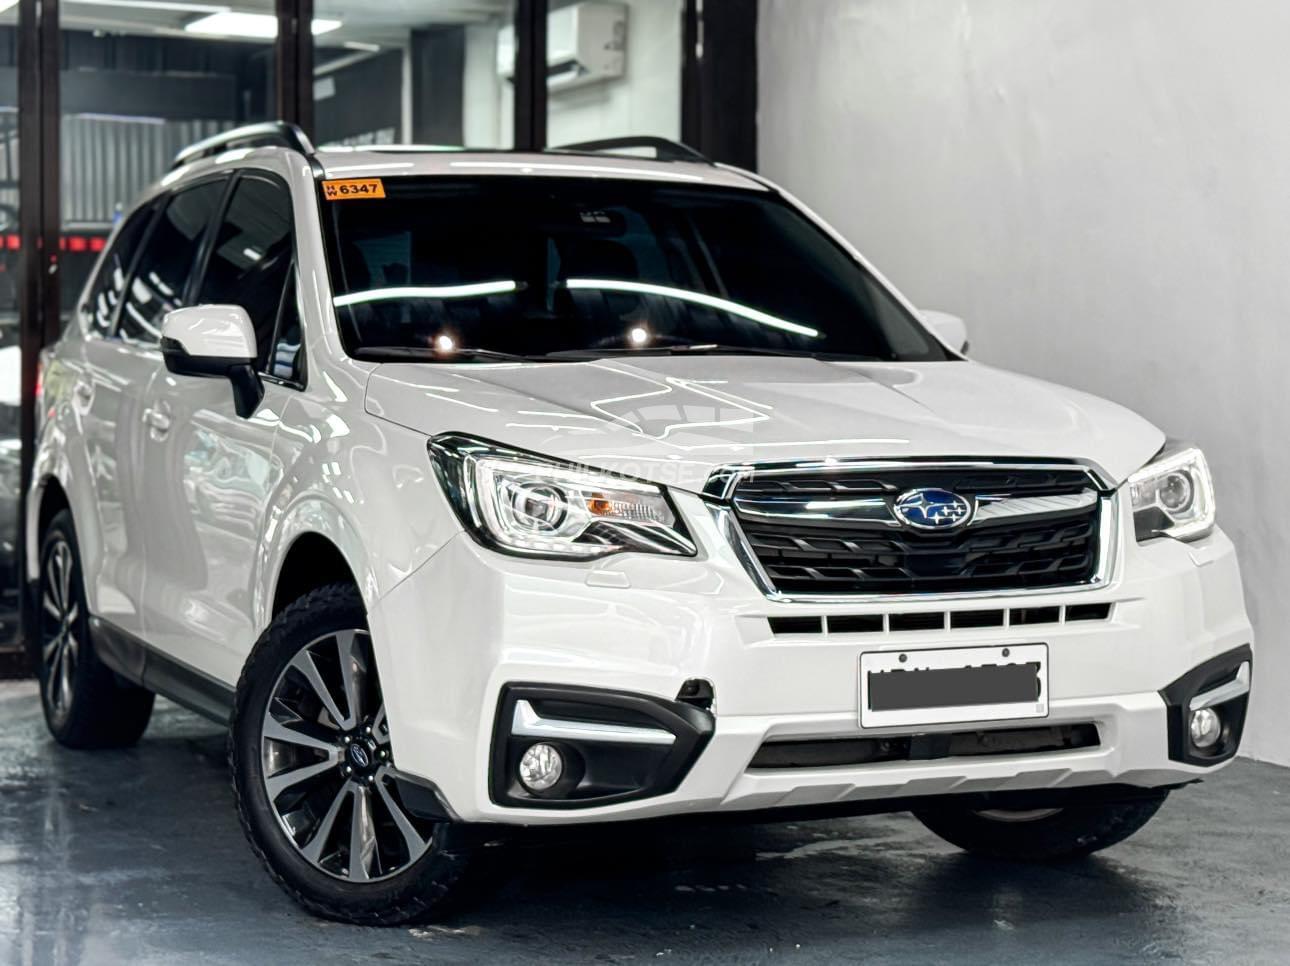 HOT!!! 2016 Subaru Forester Premium Sunroof for sale at affordable price